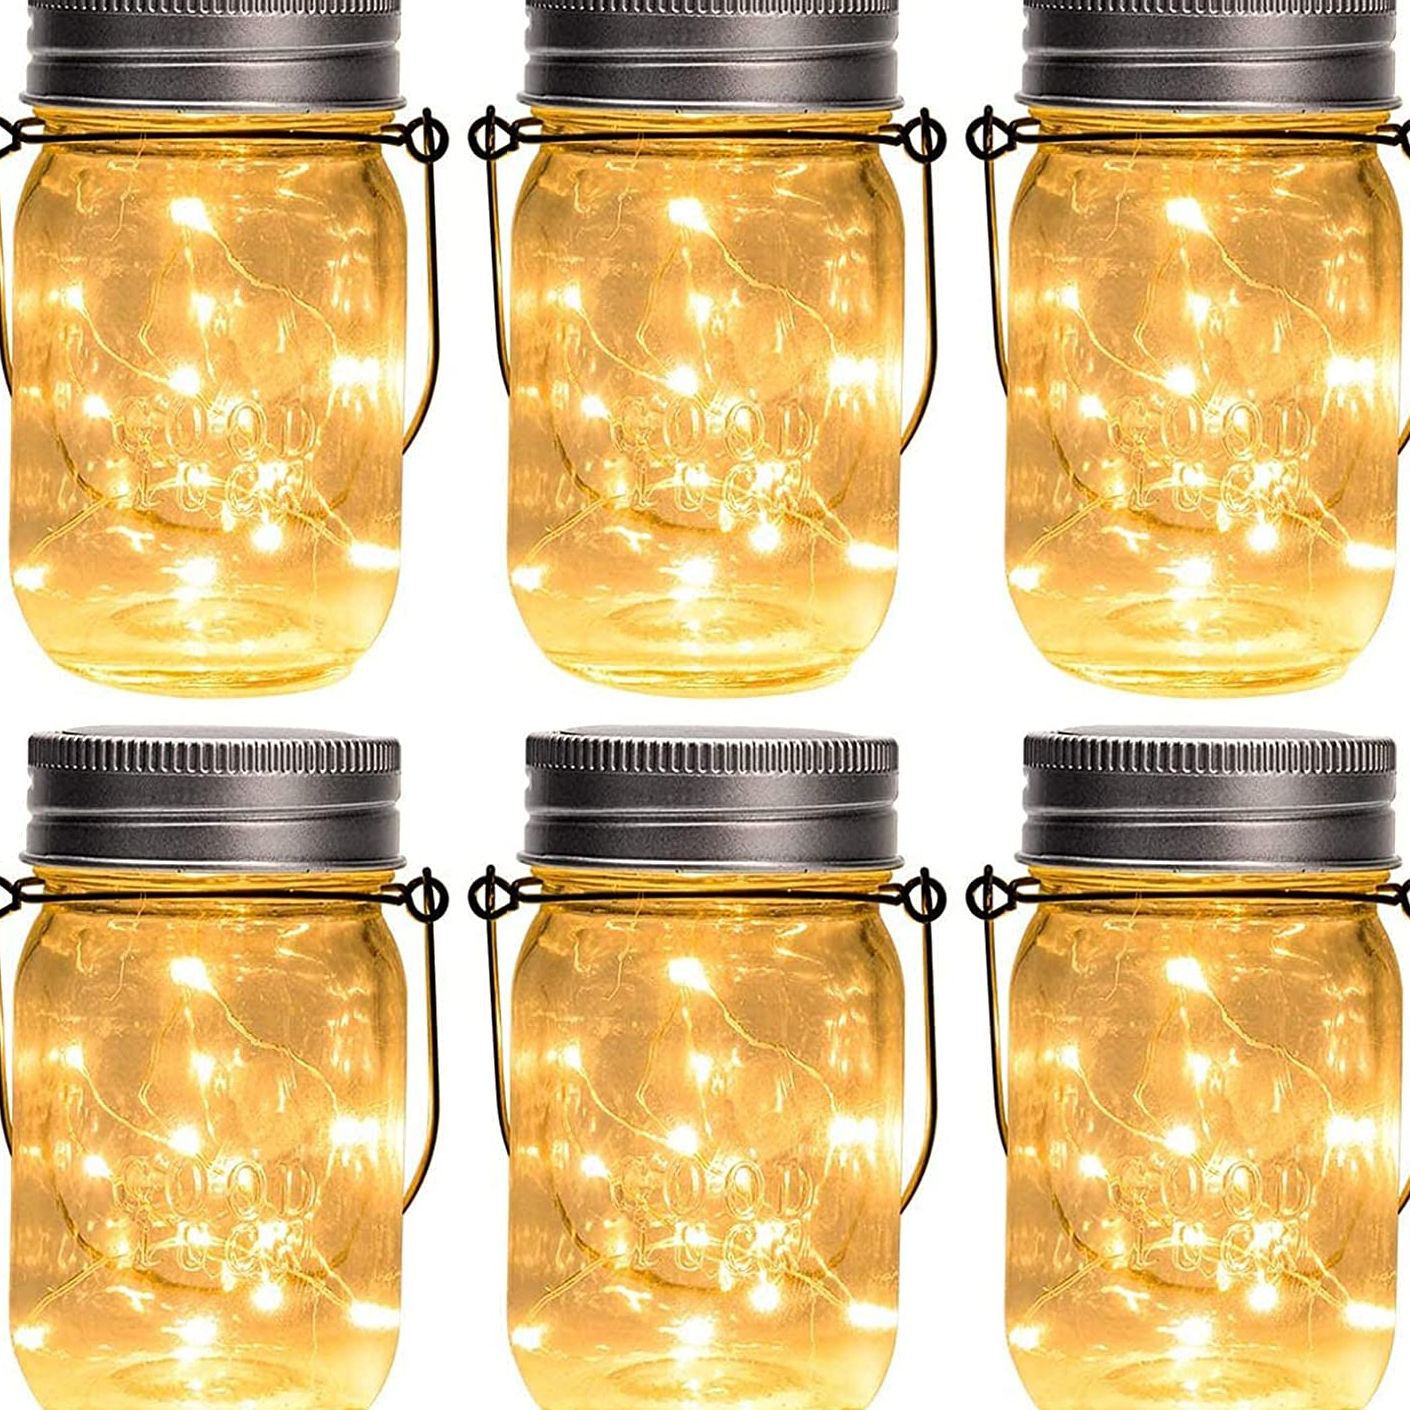 GIGALUMI Hanging Solar Mason Jar Lights, 6 Pack 30 Led String Fairy lights Solar Lanterns Table Lights, 6 Hangers and Jars included. Great Outdoor Lawn Decor for Patio Garden, Yard and Christmas Décor
